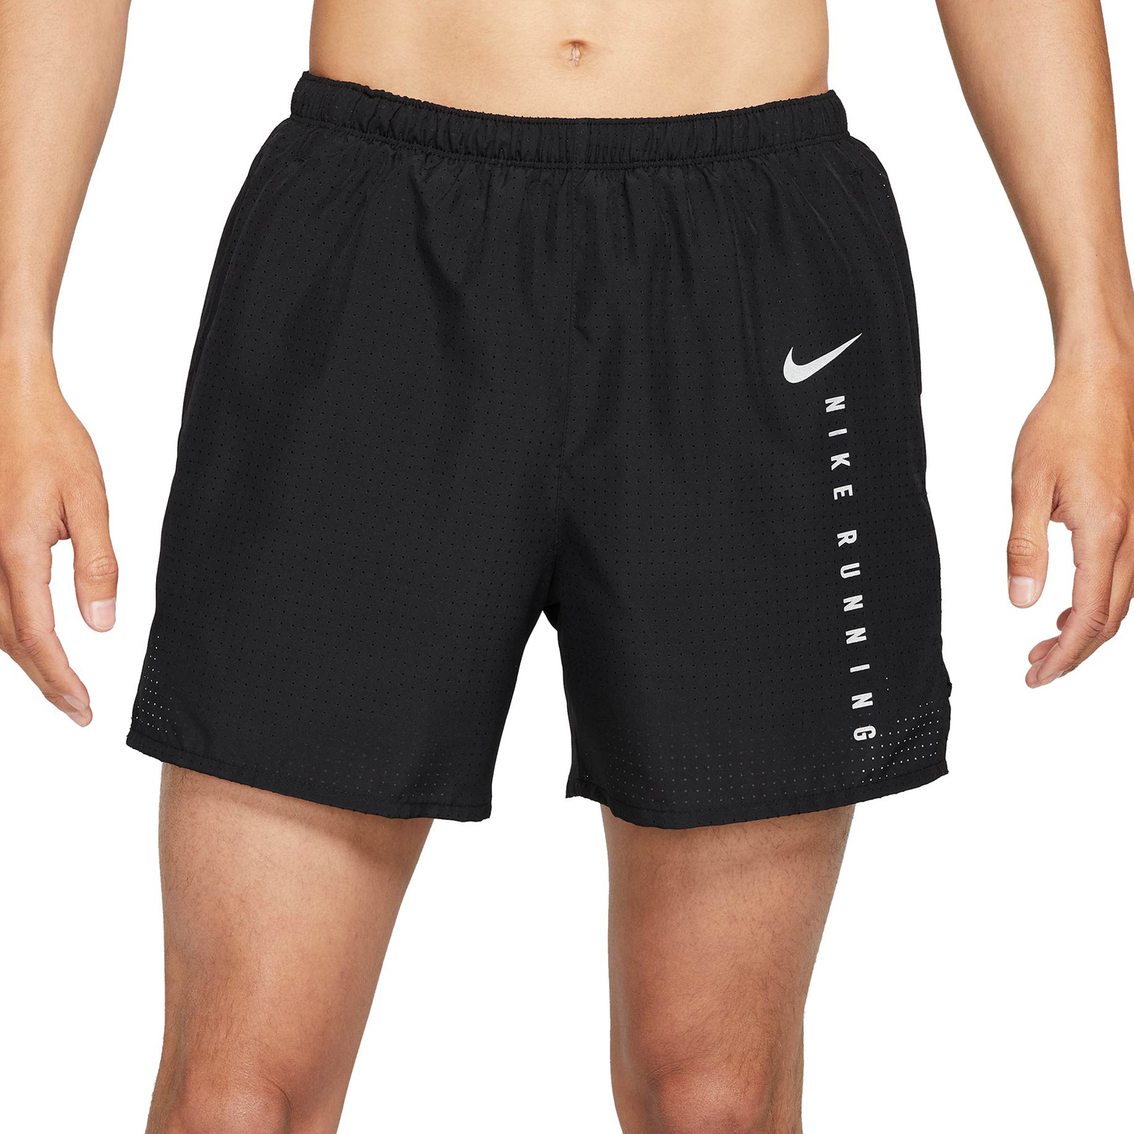 Nike Run Division 5 In. Challenge Shorts | Shorts | Clothing ...